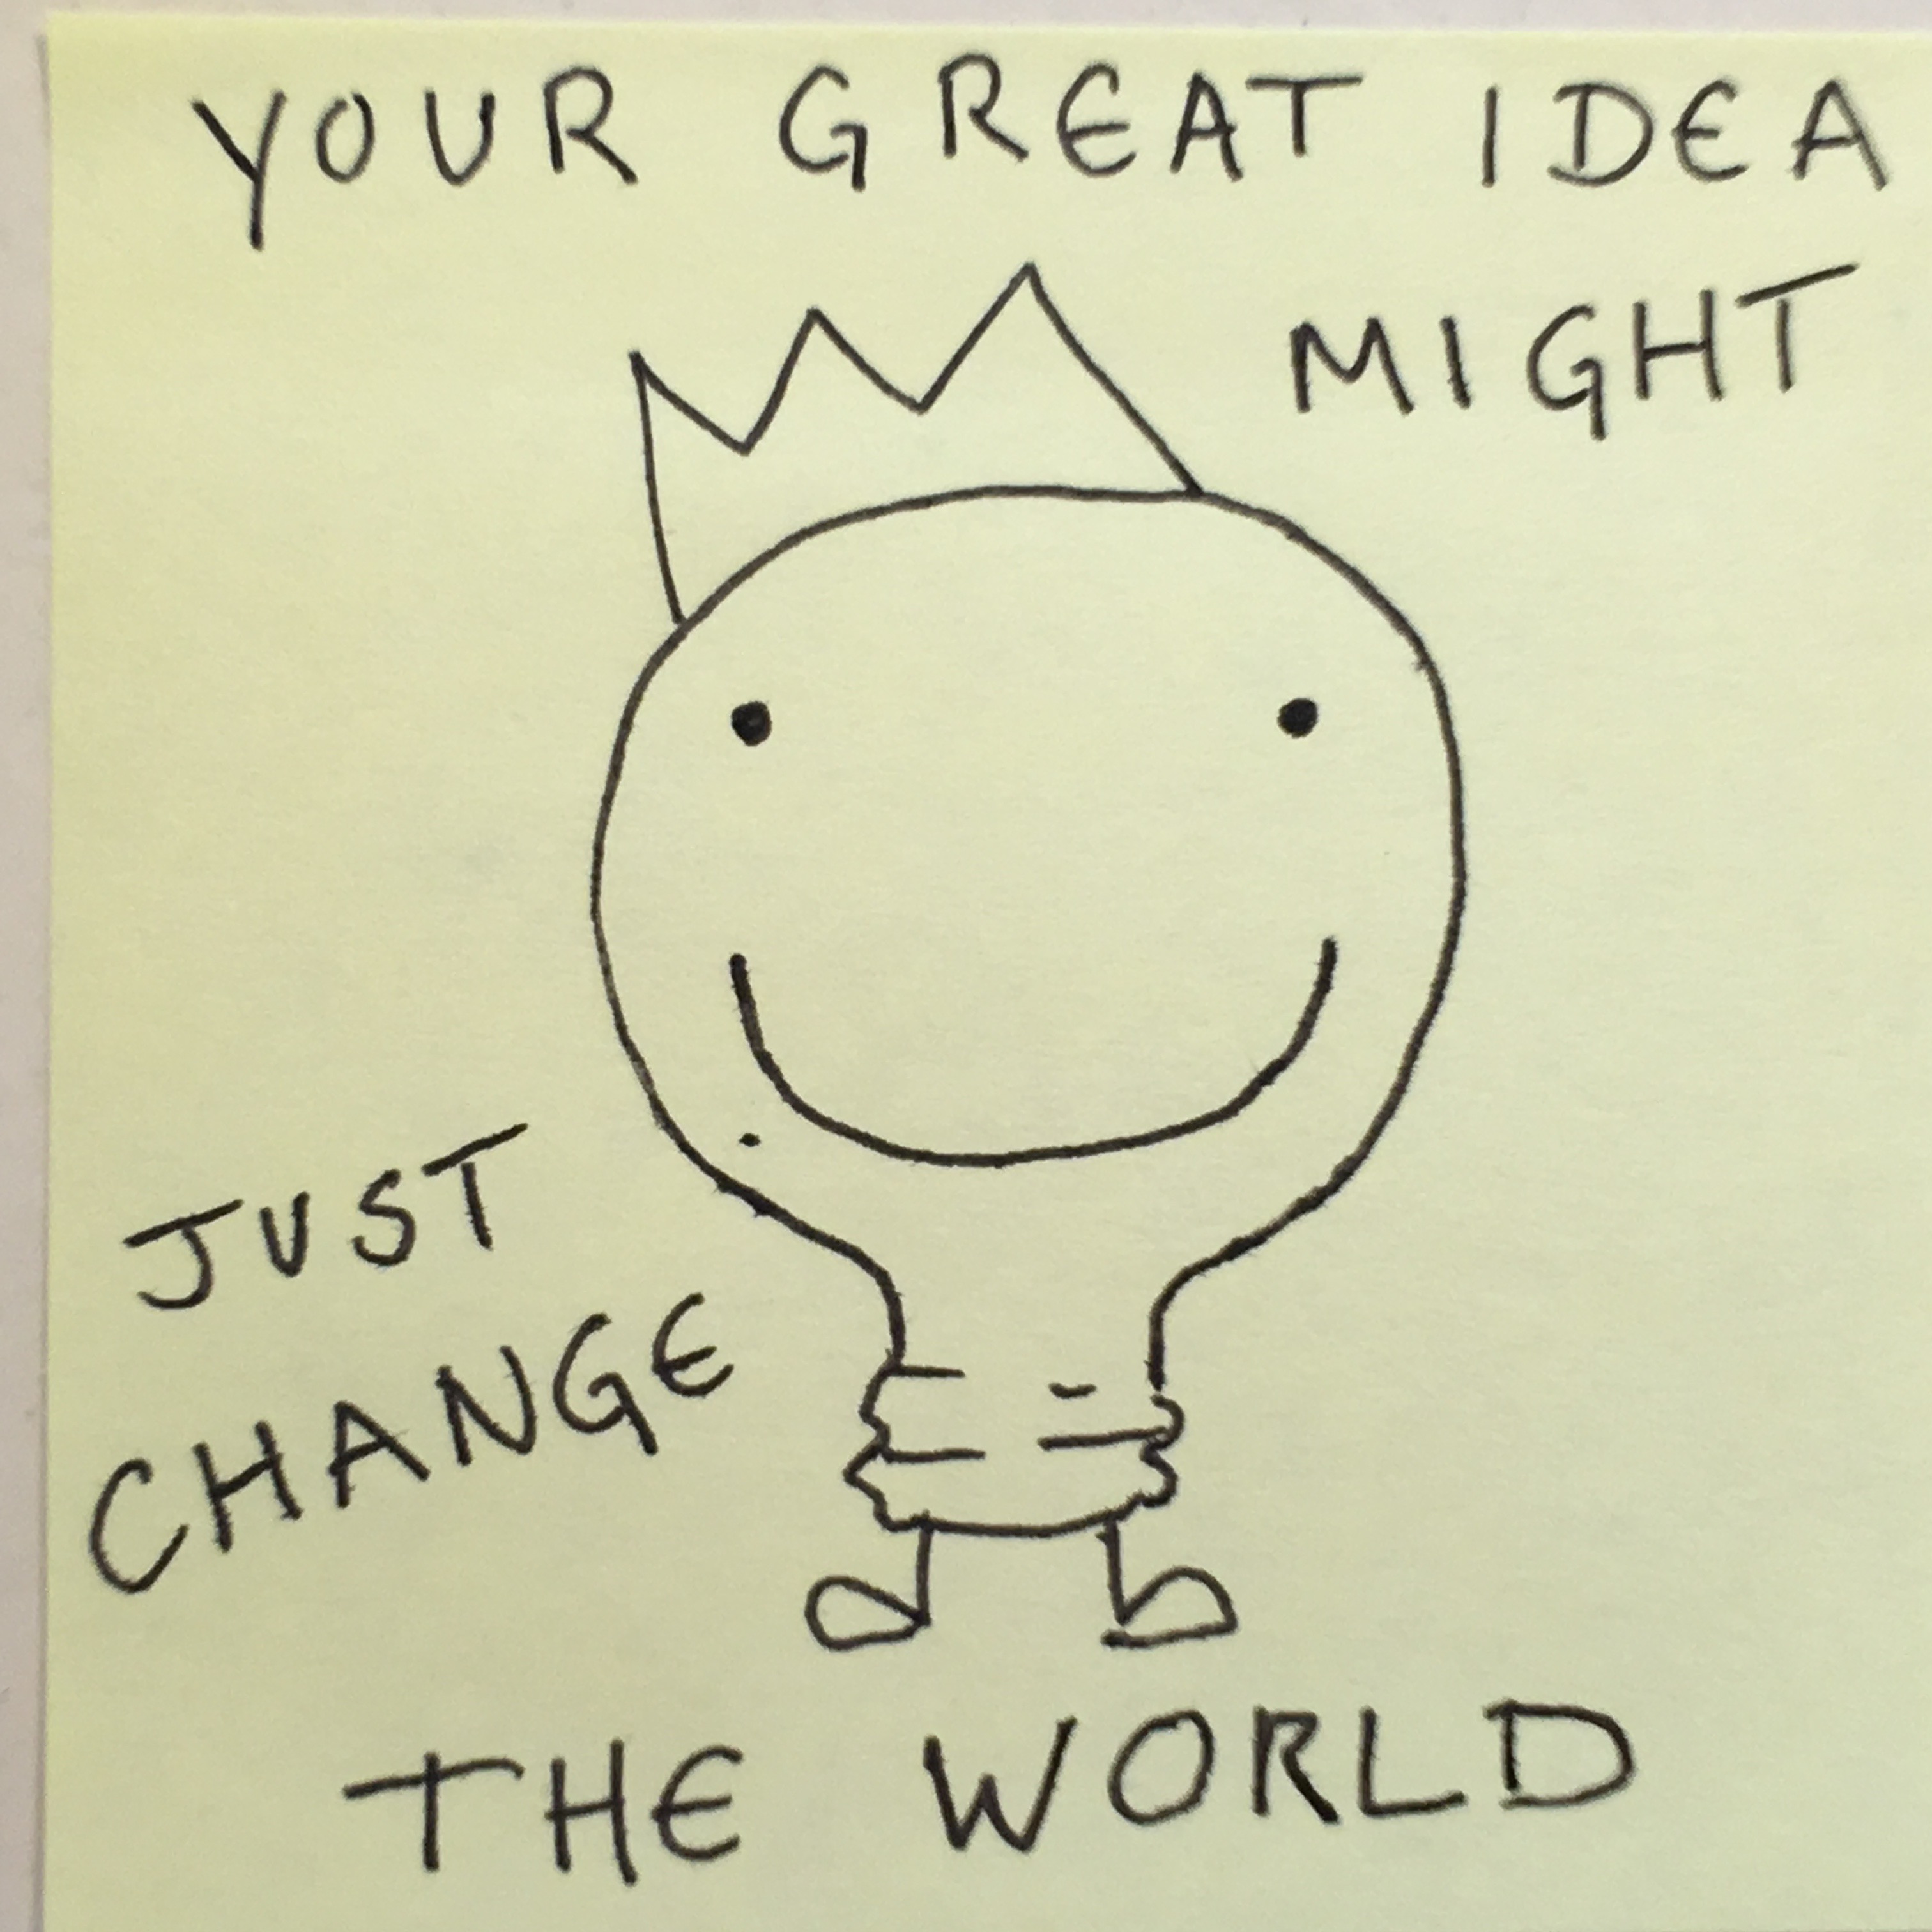 Your great idea might change the world